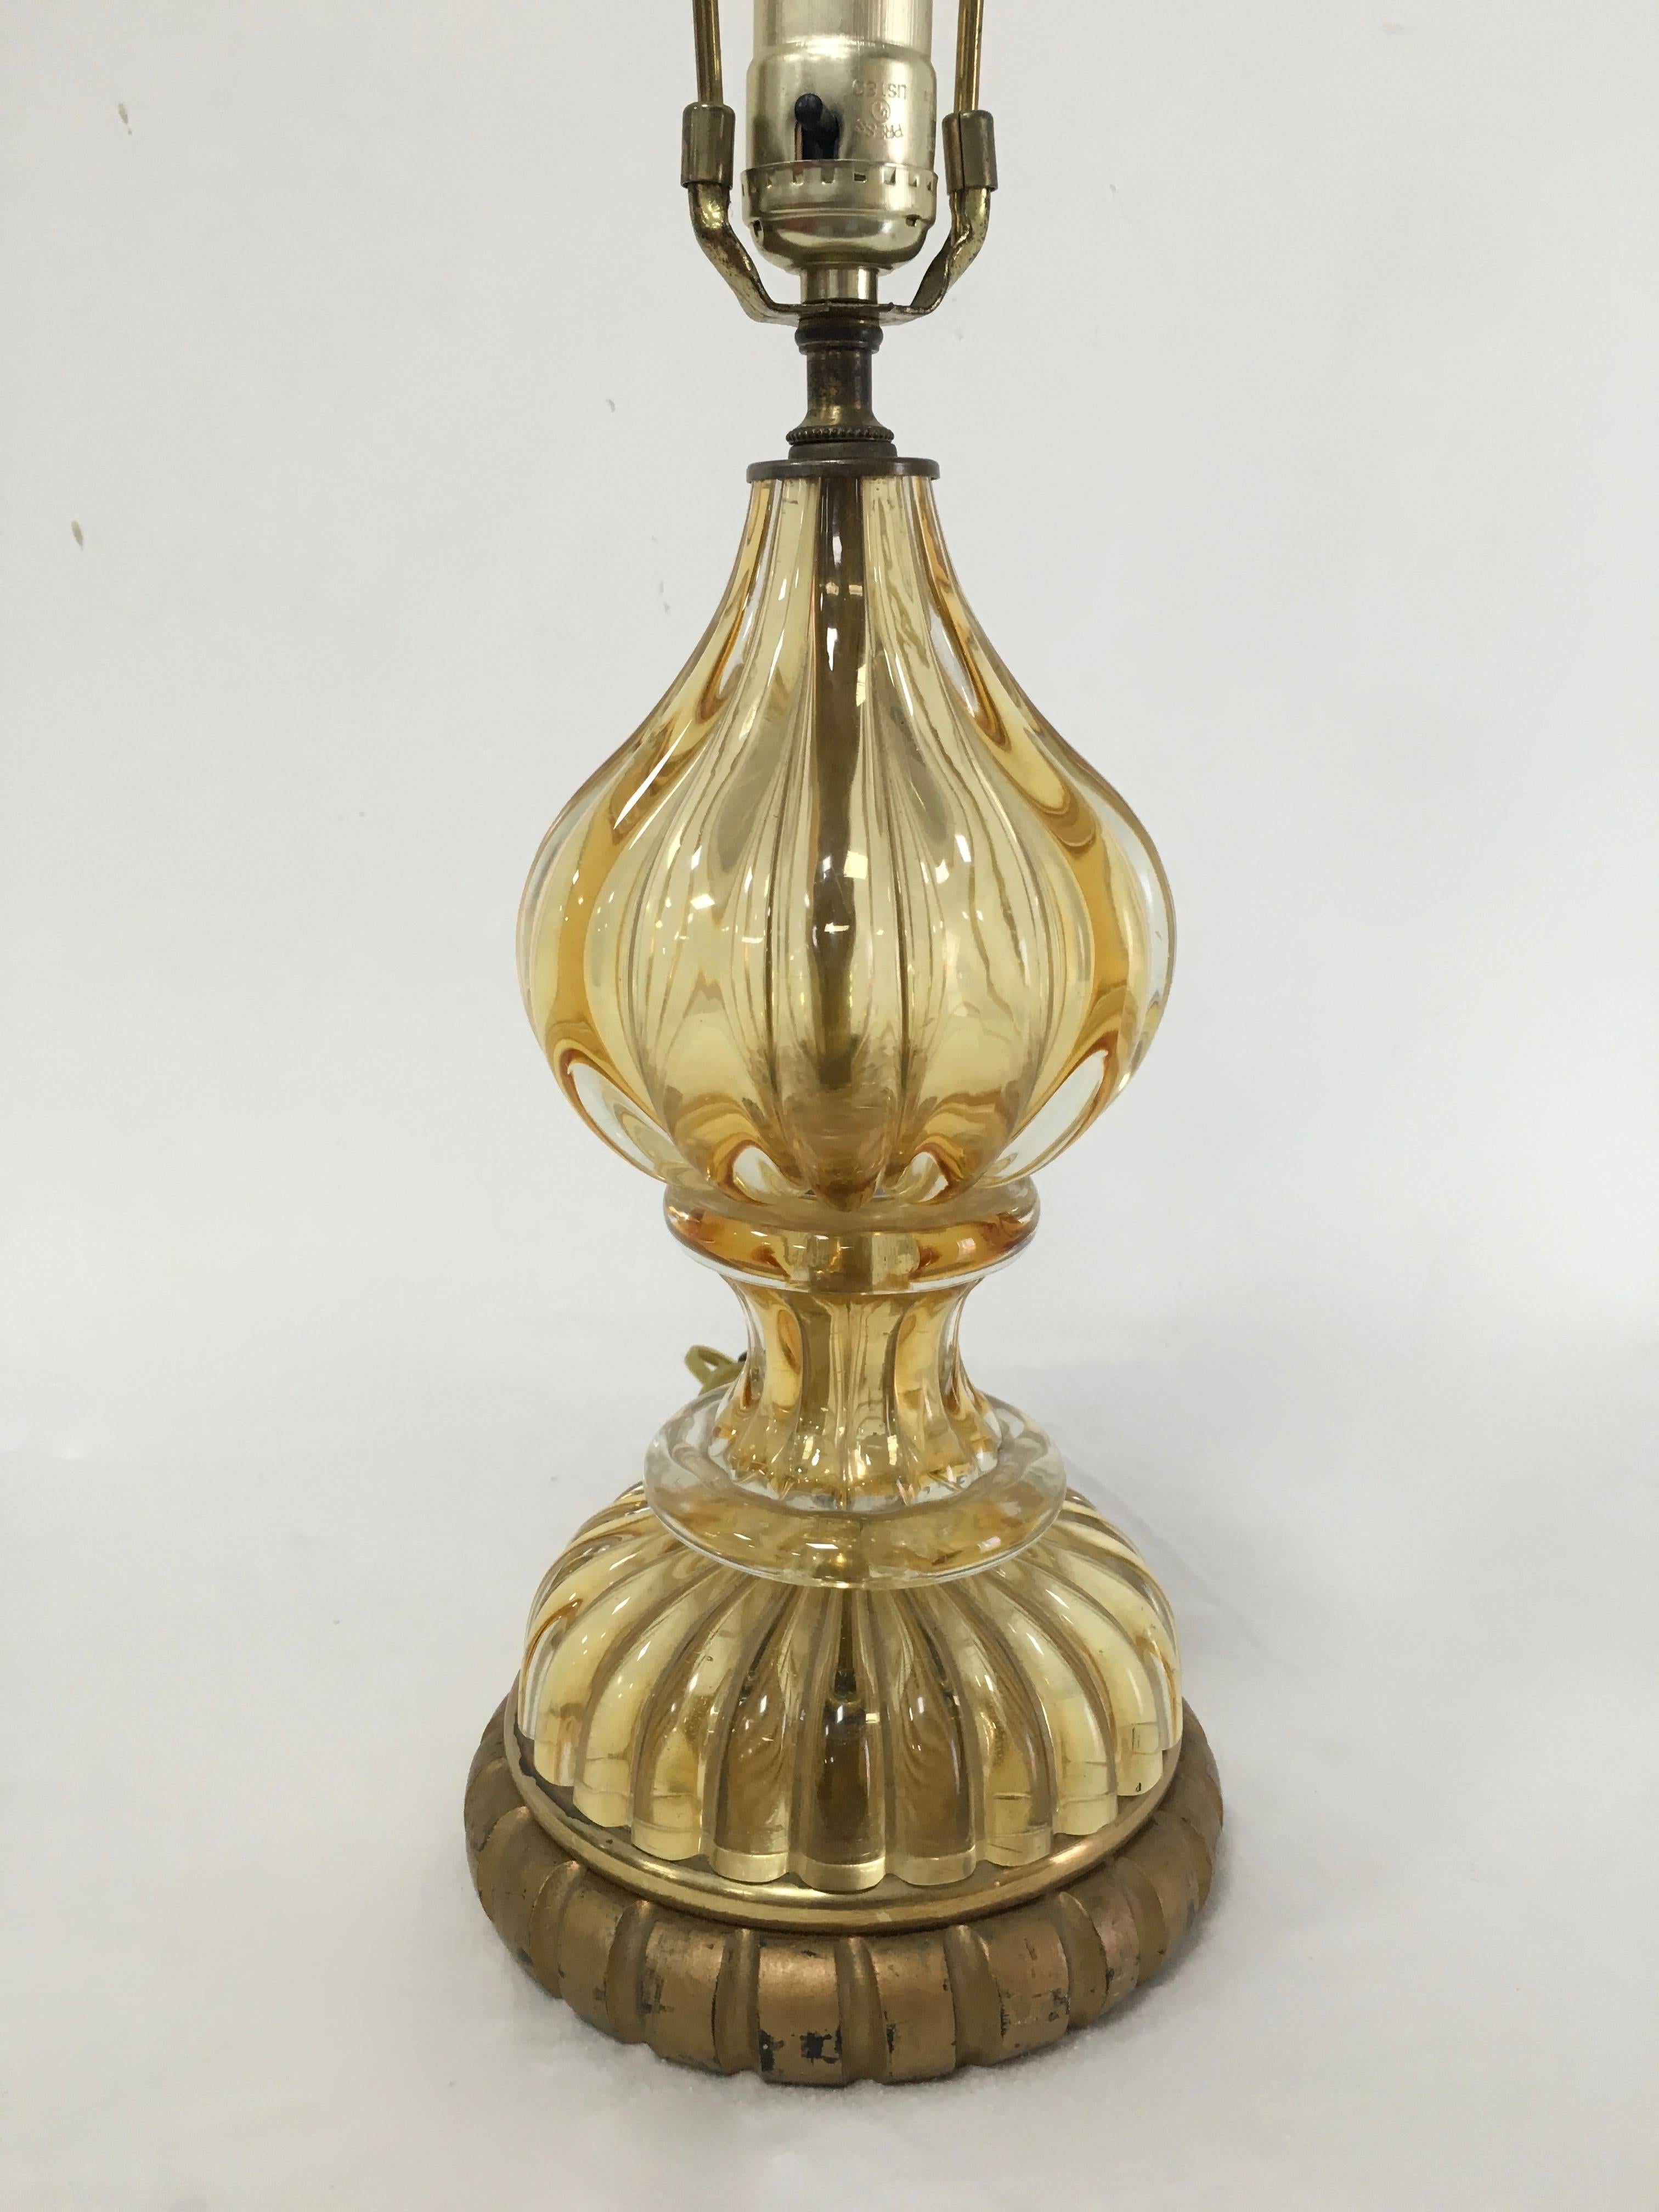 Simple, sophisticated and elegant gold Murano table, desk or vanity lamp with gilt carved base.

In the right house the Murano lamp could make a great statement anywhere, even the kitchen - low lighting is the sexiest and most appealing... and